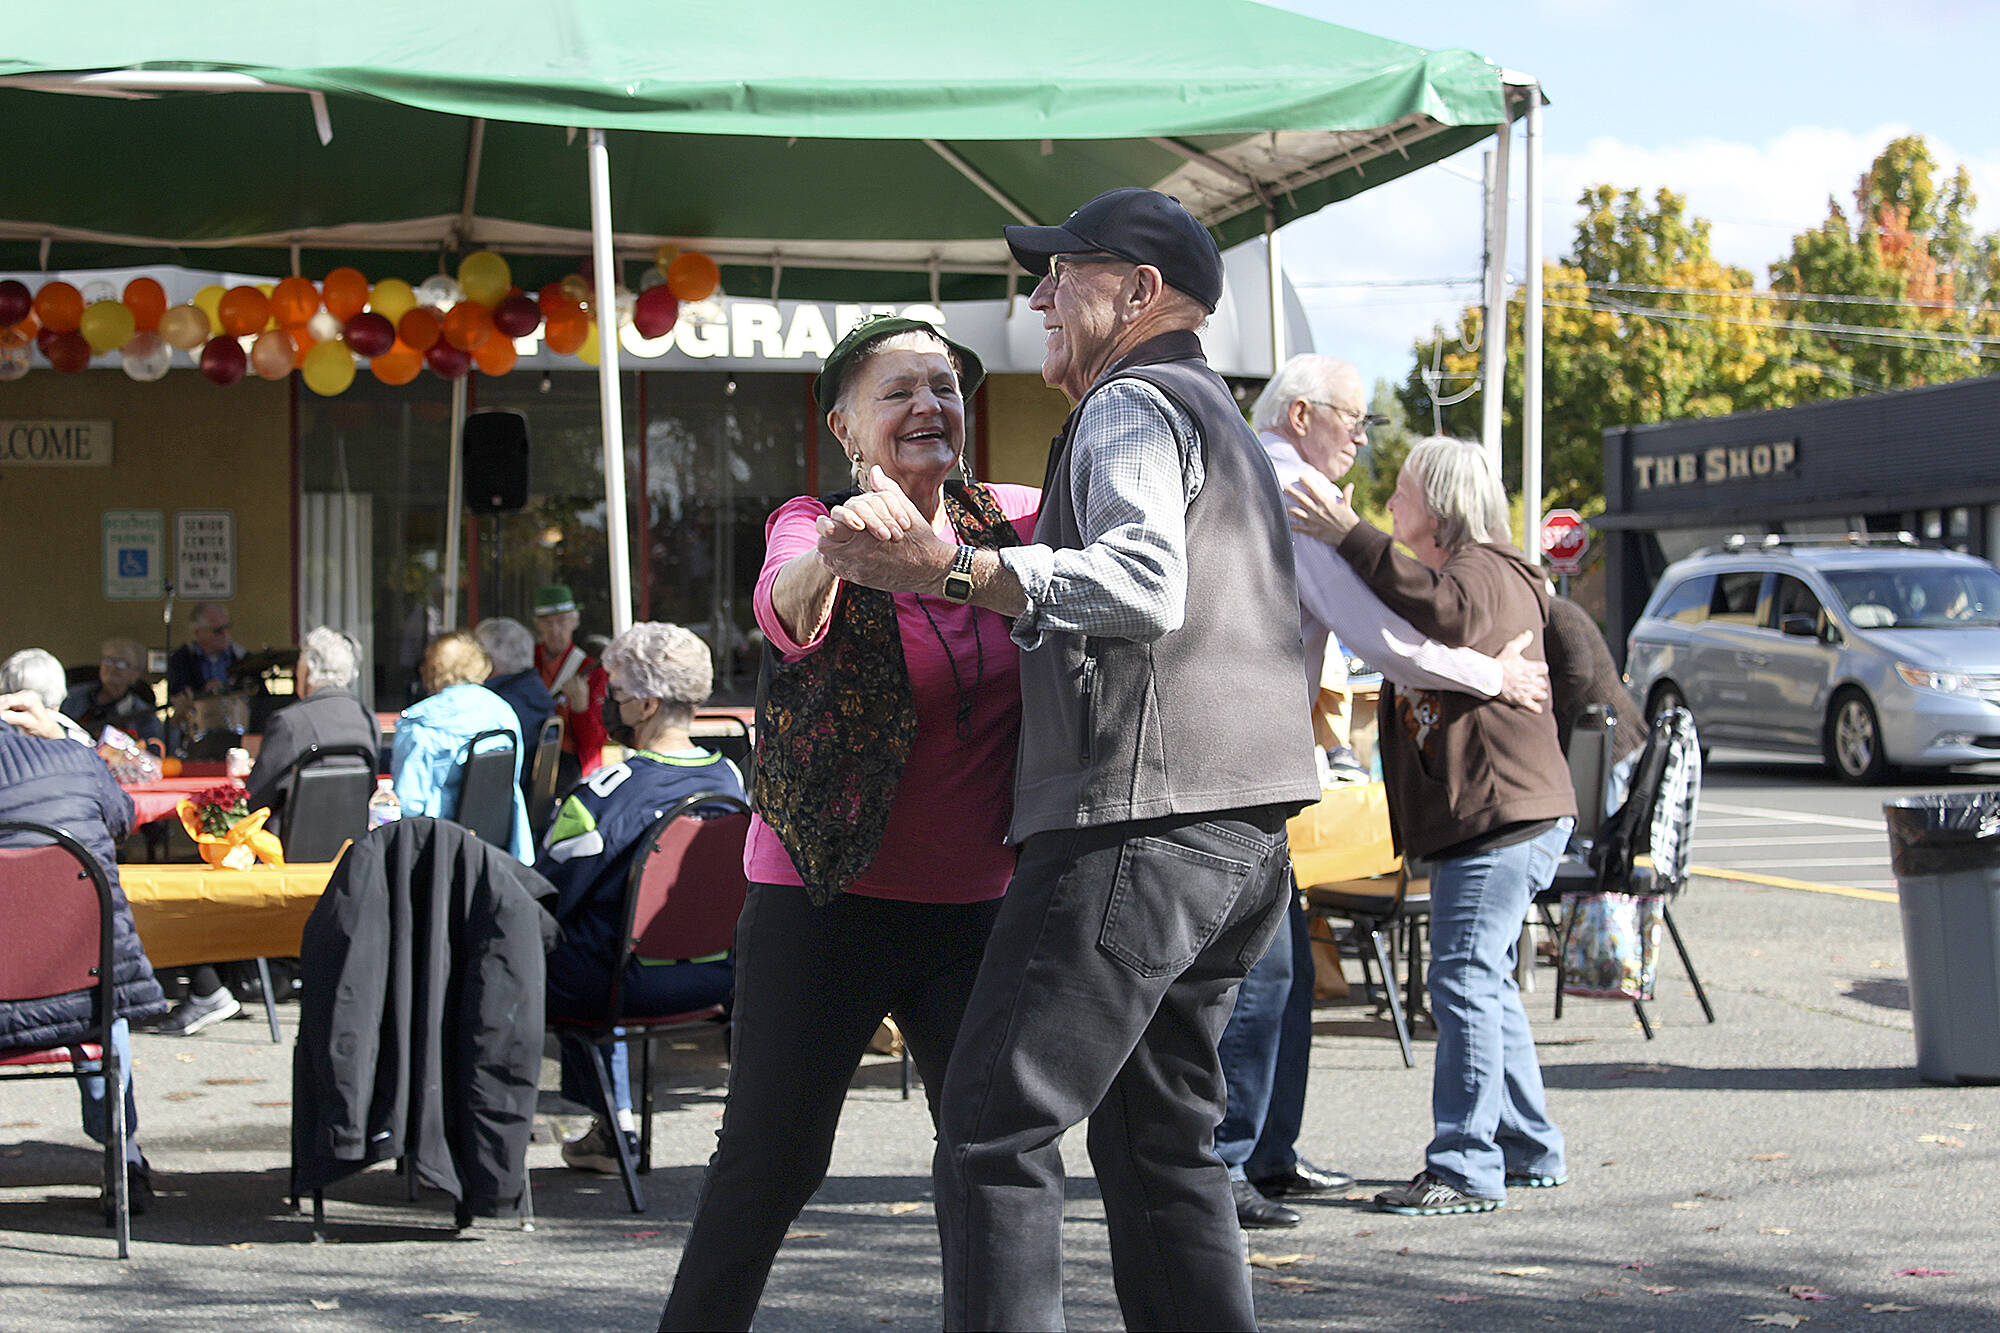 Plateau seniors were able to enjoy an Oktoberfest celebration on Oct. 7 at the Enumclaw Senior Center. Festivities were compete with live music by Patty & The Travlin’ 3 and brats. Pictured is Richard Lykstad and Dorothy Sleigh dancing to the beat.